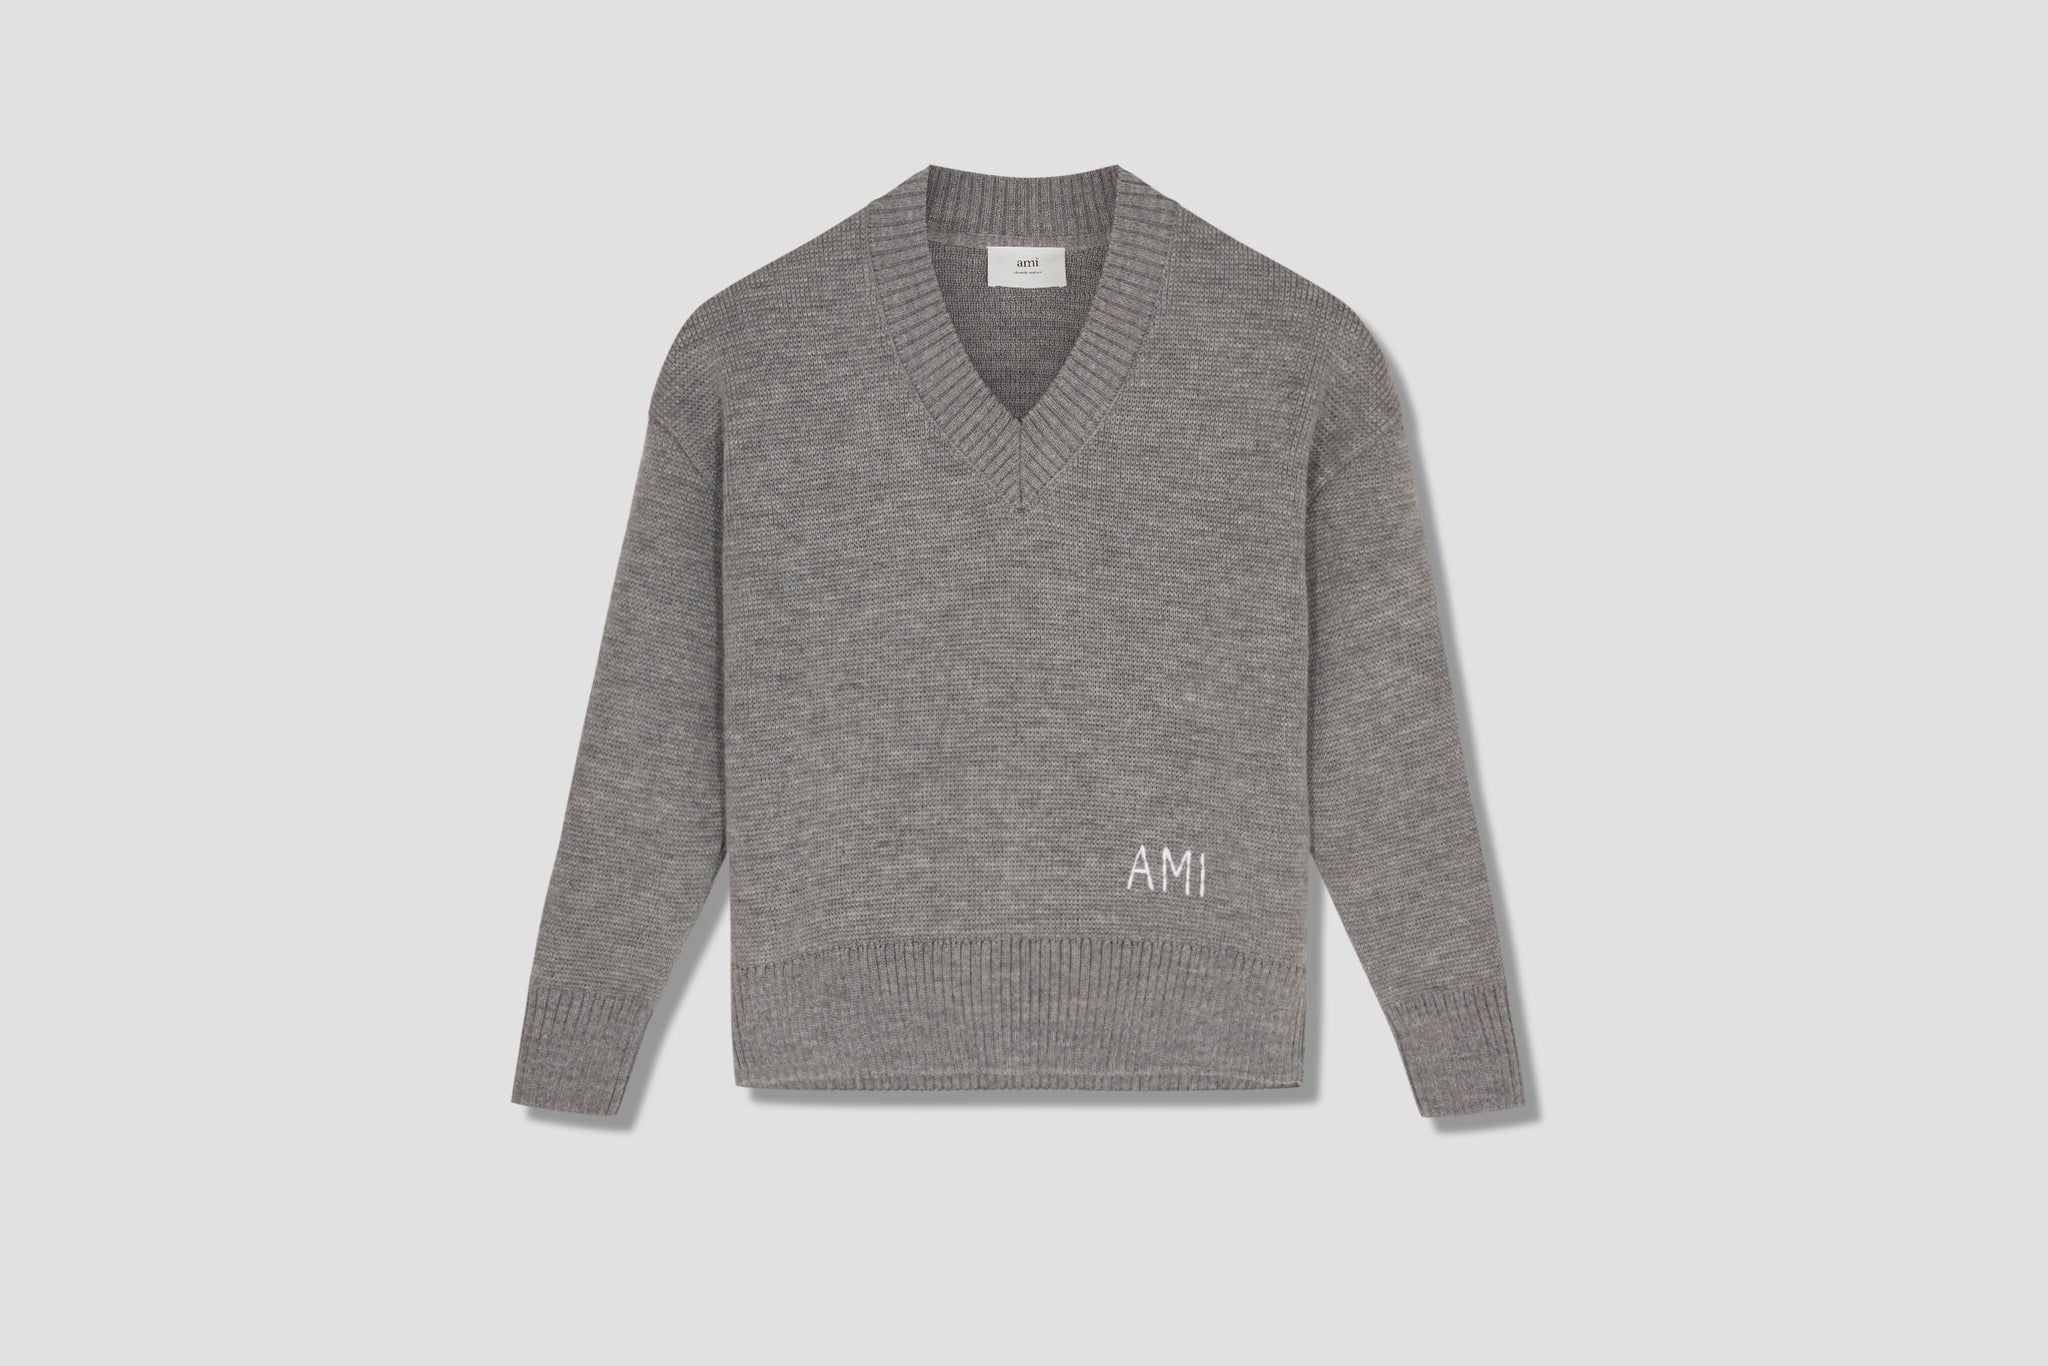 V-NECK AMI EMBROIDERED SWEATER H21K160.007 Grey